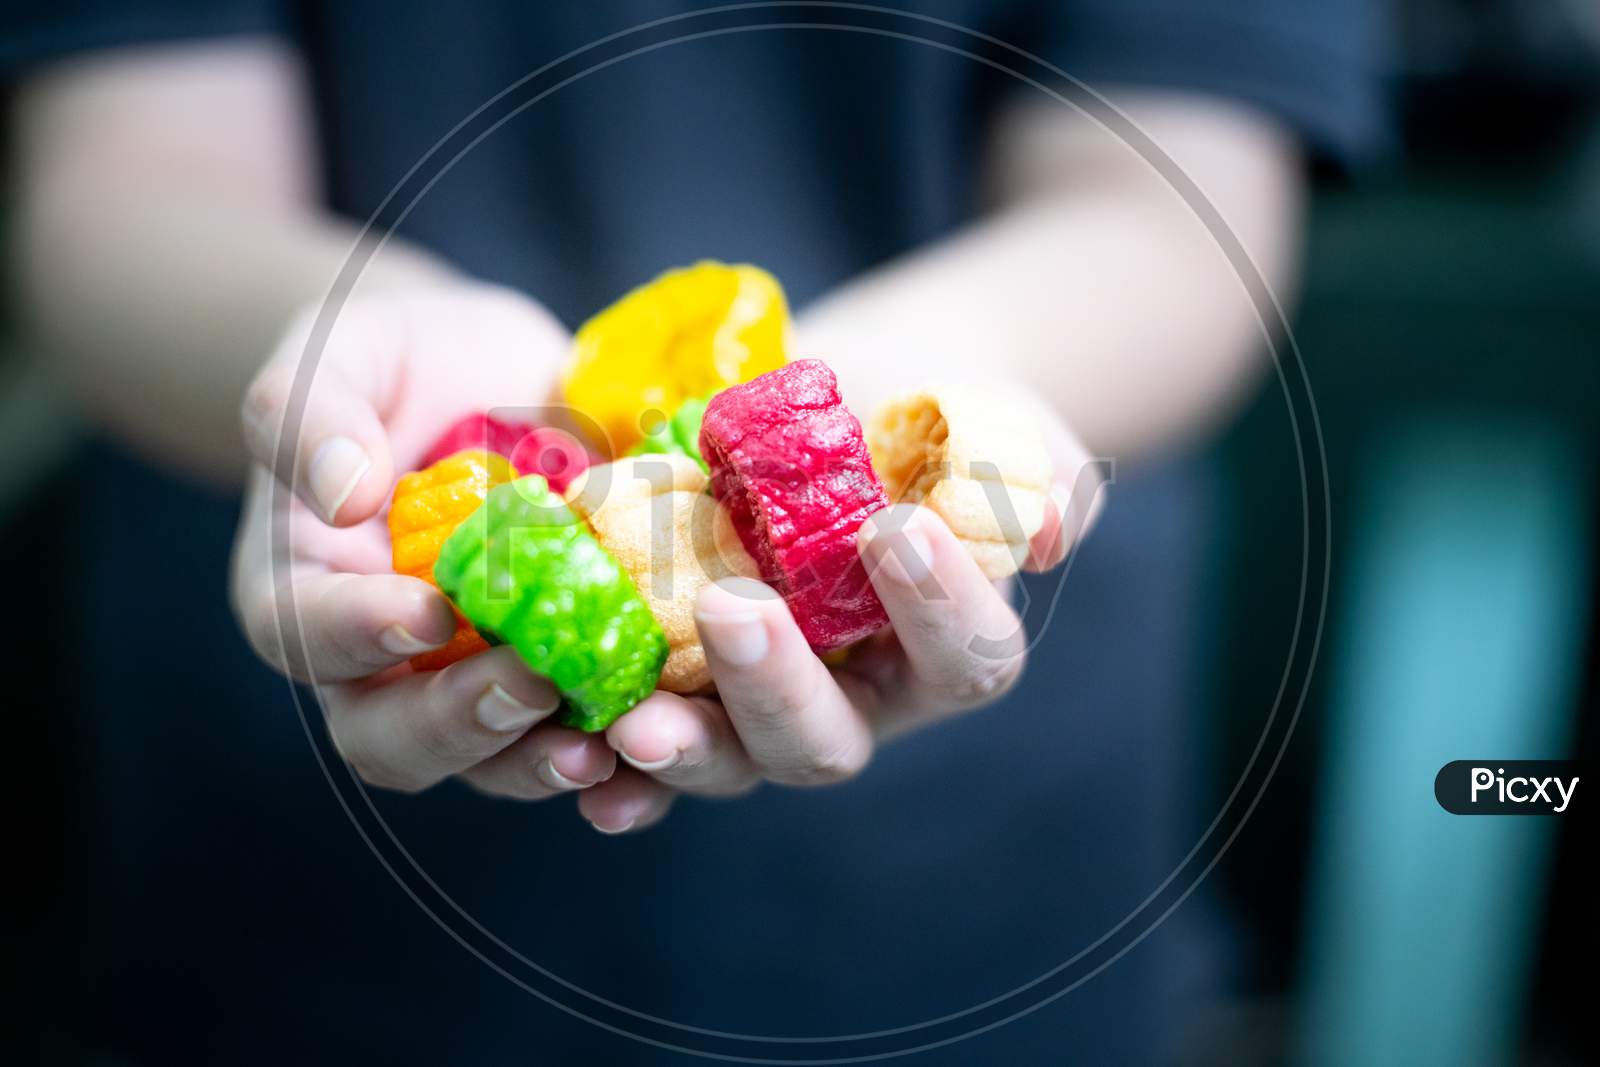 Young Indian Woman Holding Colorful Fried Food Made Of Potato Starch And Sago Called Far Far Fryums Which Is A Popular Food In North India Or A Great Snack